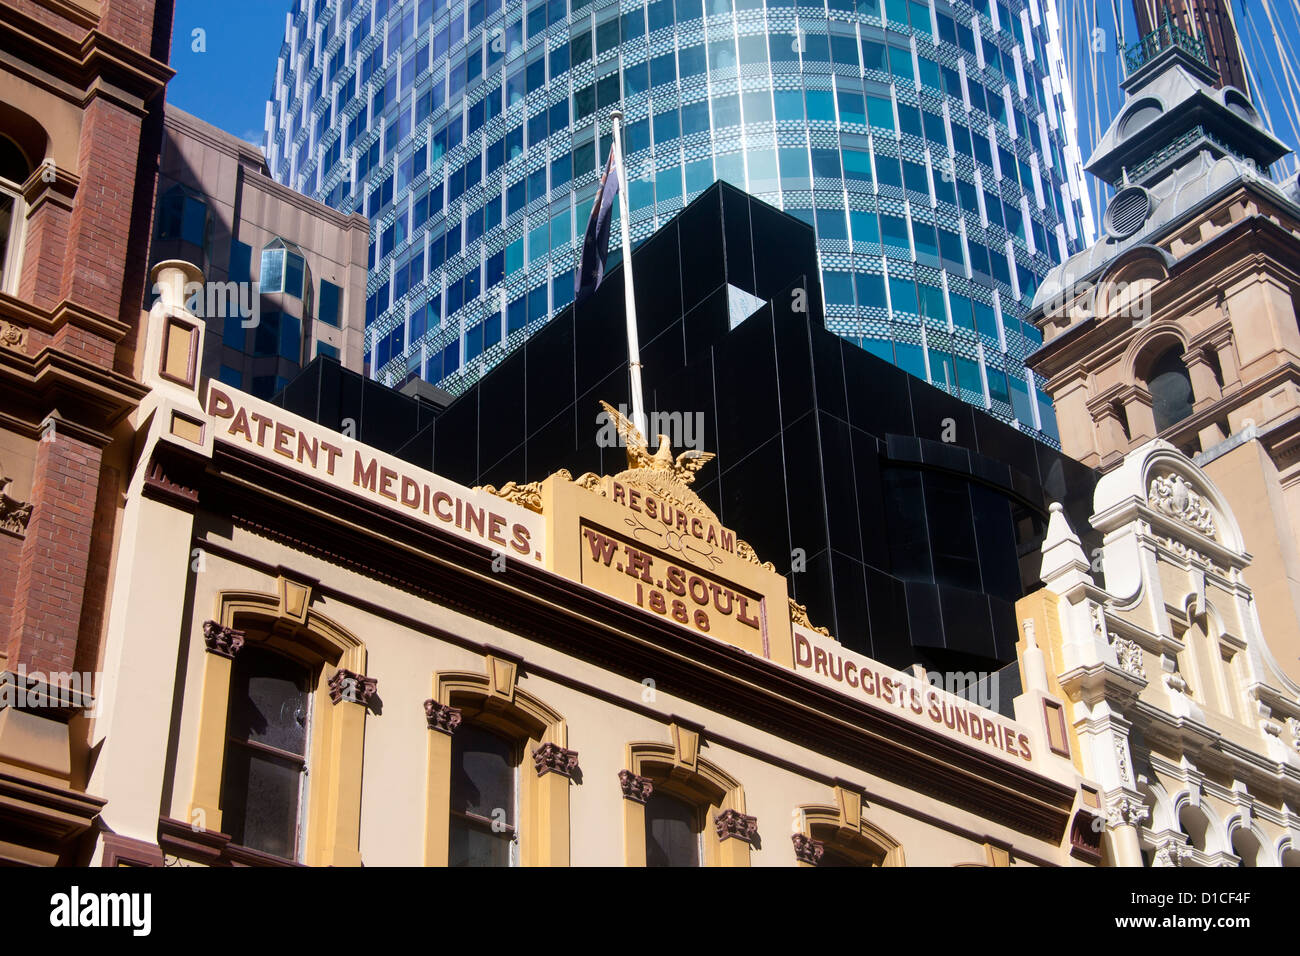 Mix of old colonial and contemporary / modern architecture Pitt Street Sydney New South Wales (NSW) Australia Stock Photo